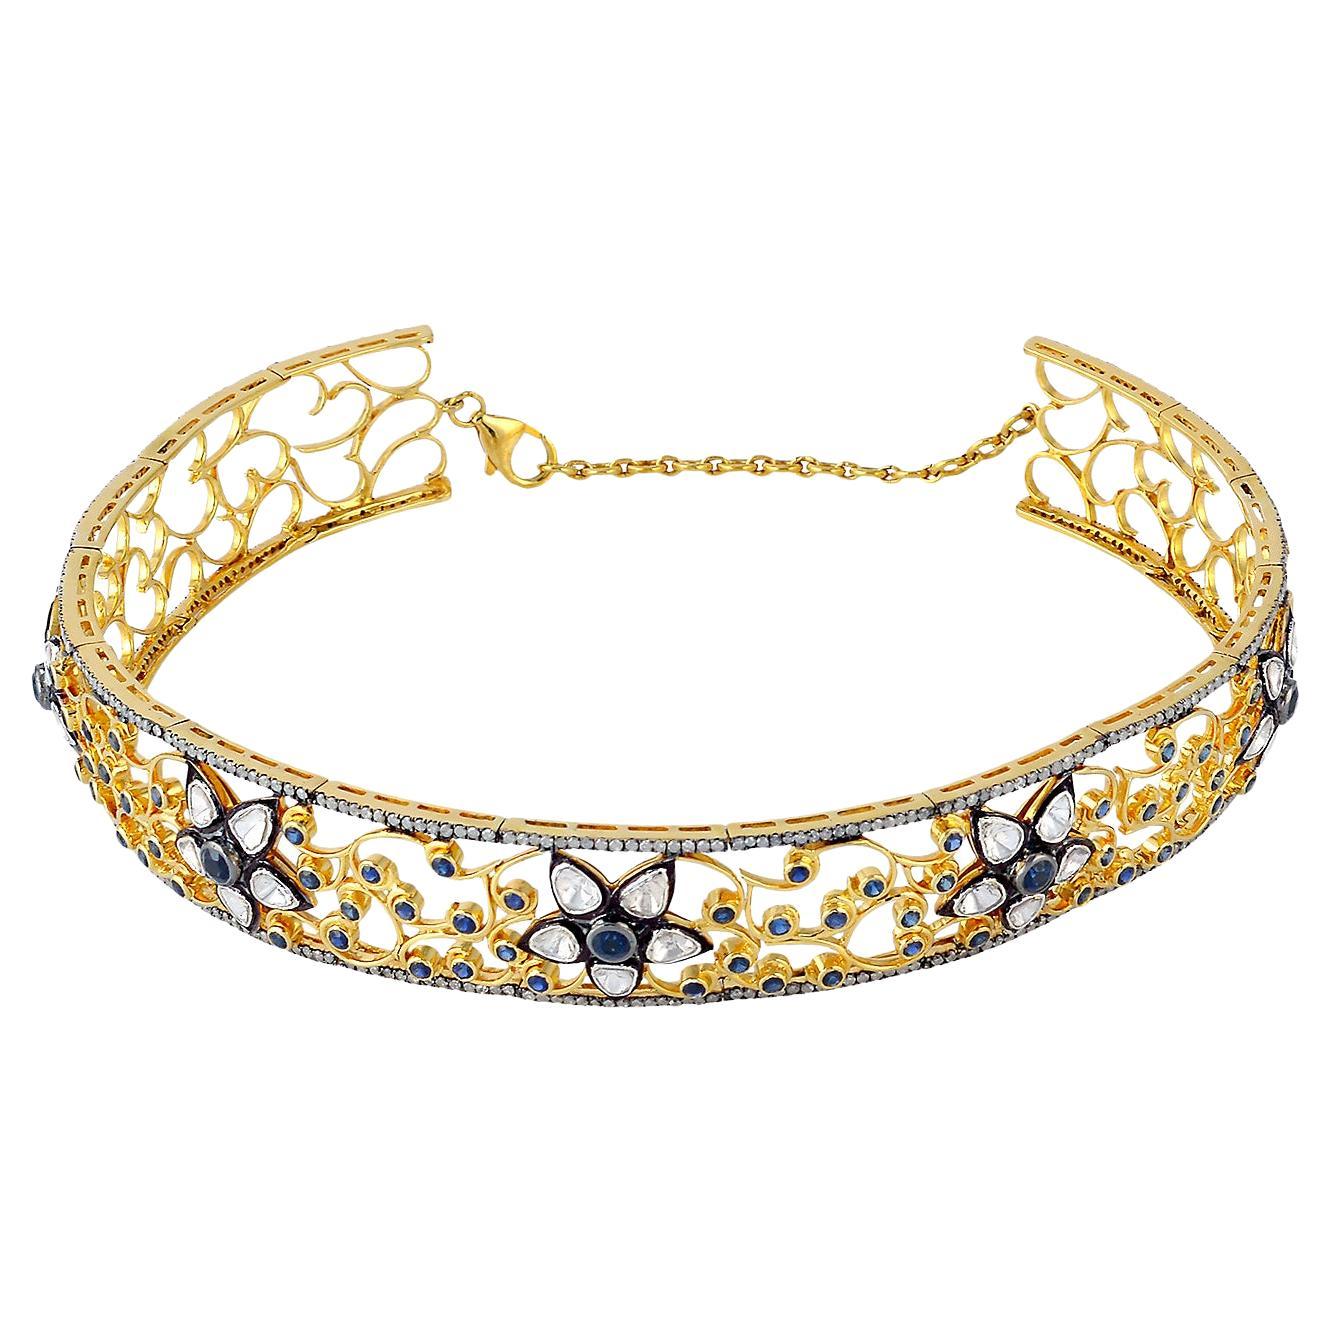 Filigree Designed Choker Necklace in 18k Gold & Silver with Diamonds & Sapphires